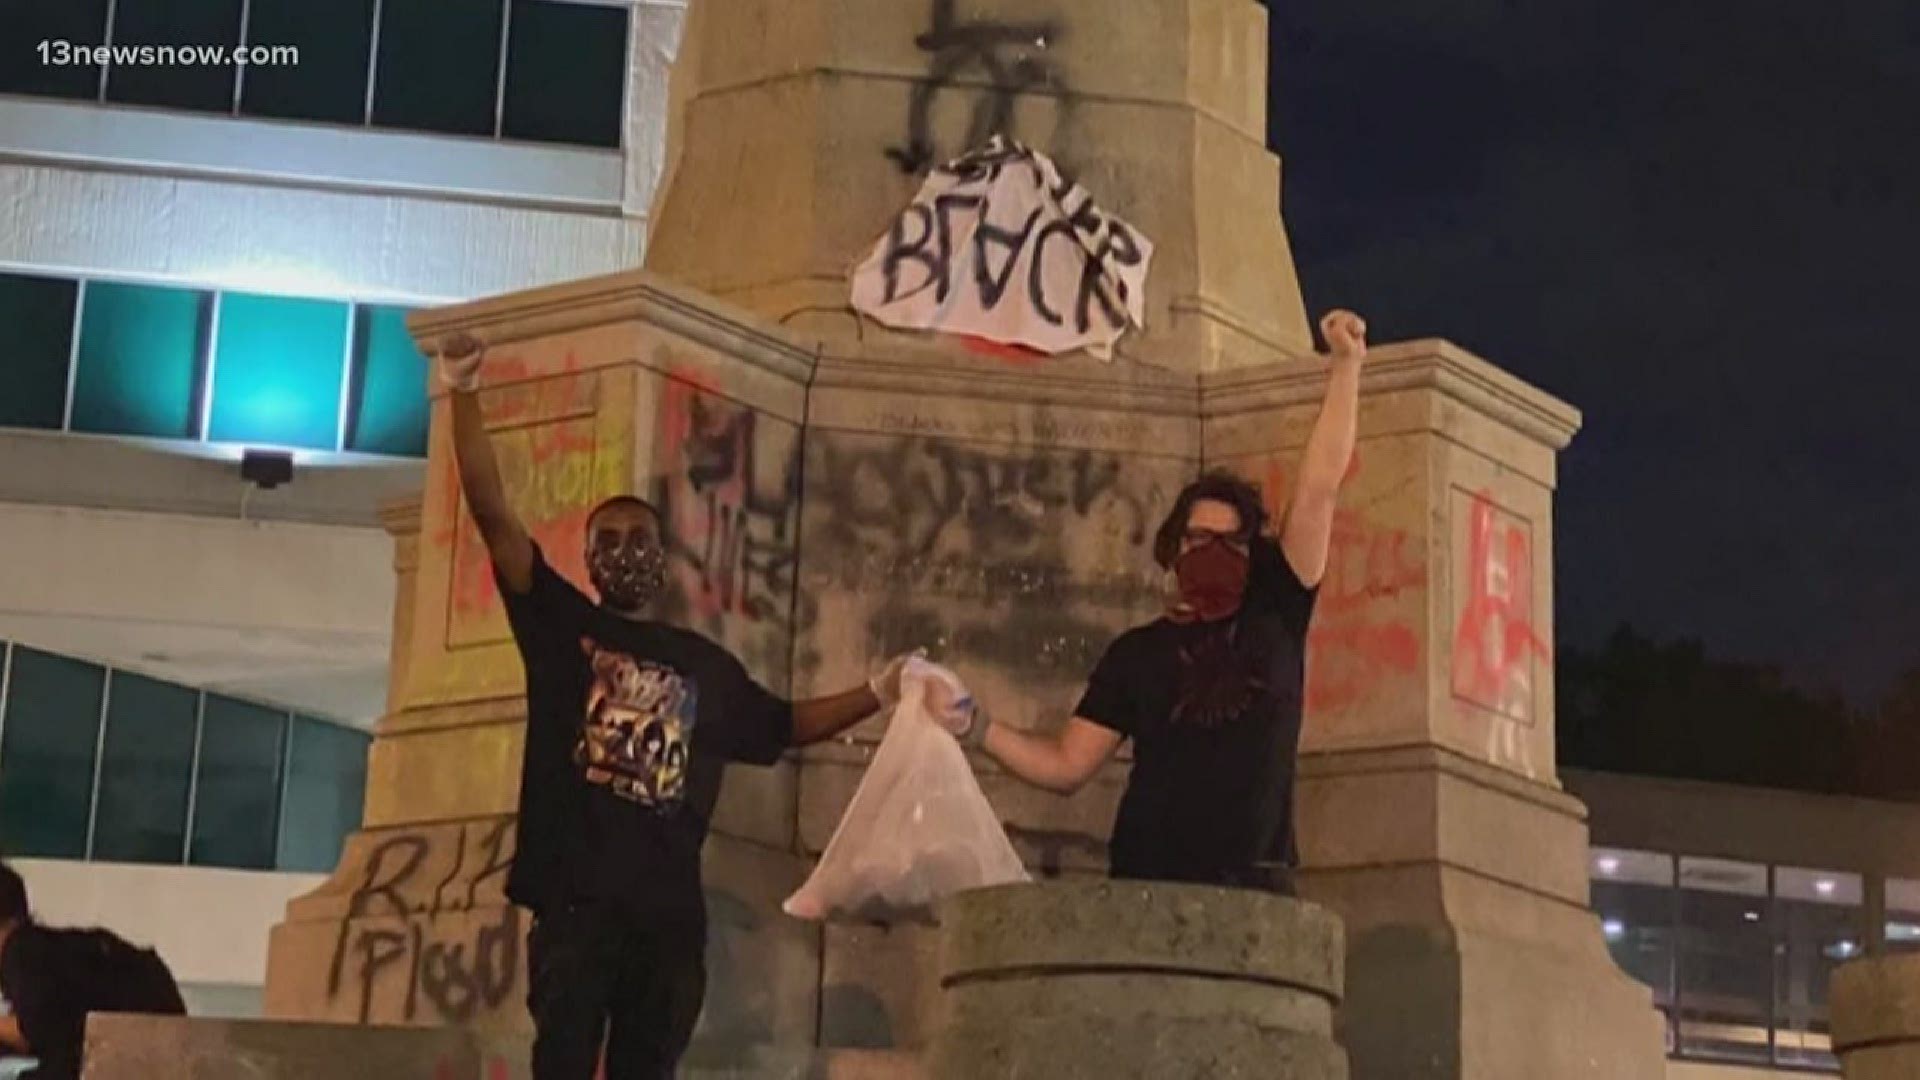 The new '757 Uplift' organization shows how some people are supporting a fight against racism and police violence from the sidelines, with a broom and a trash bag.